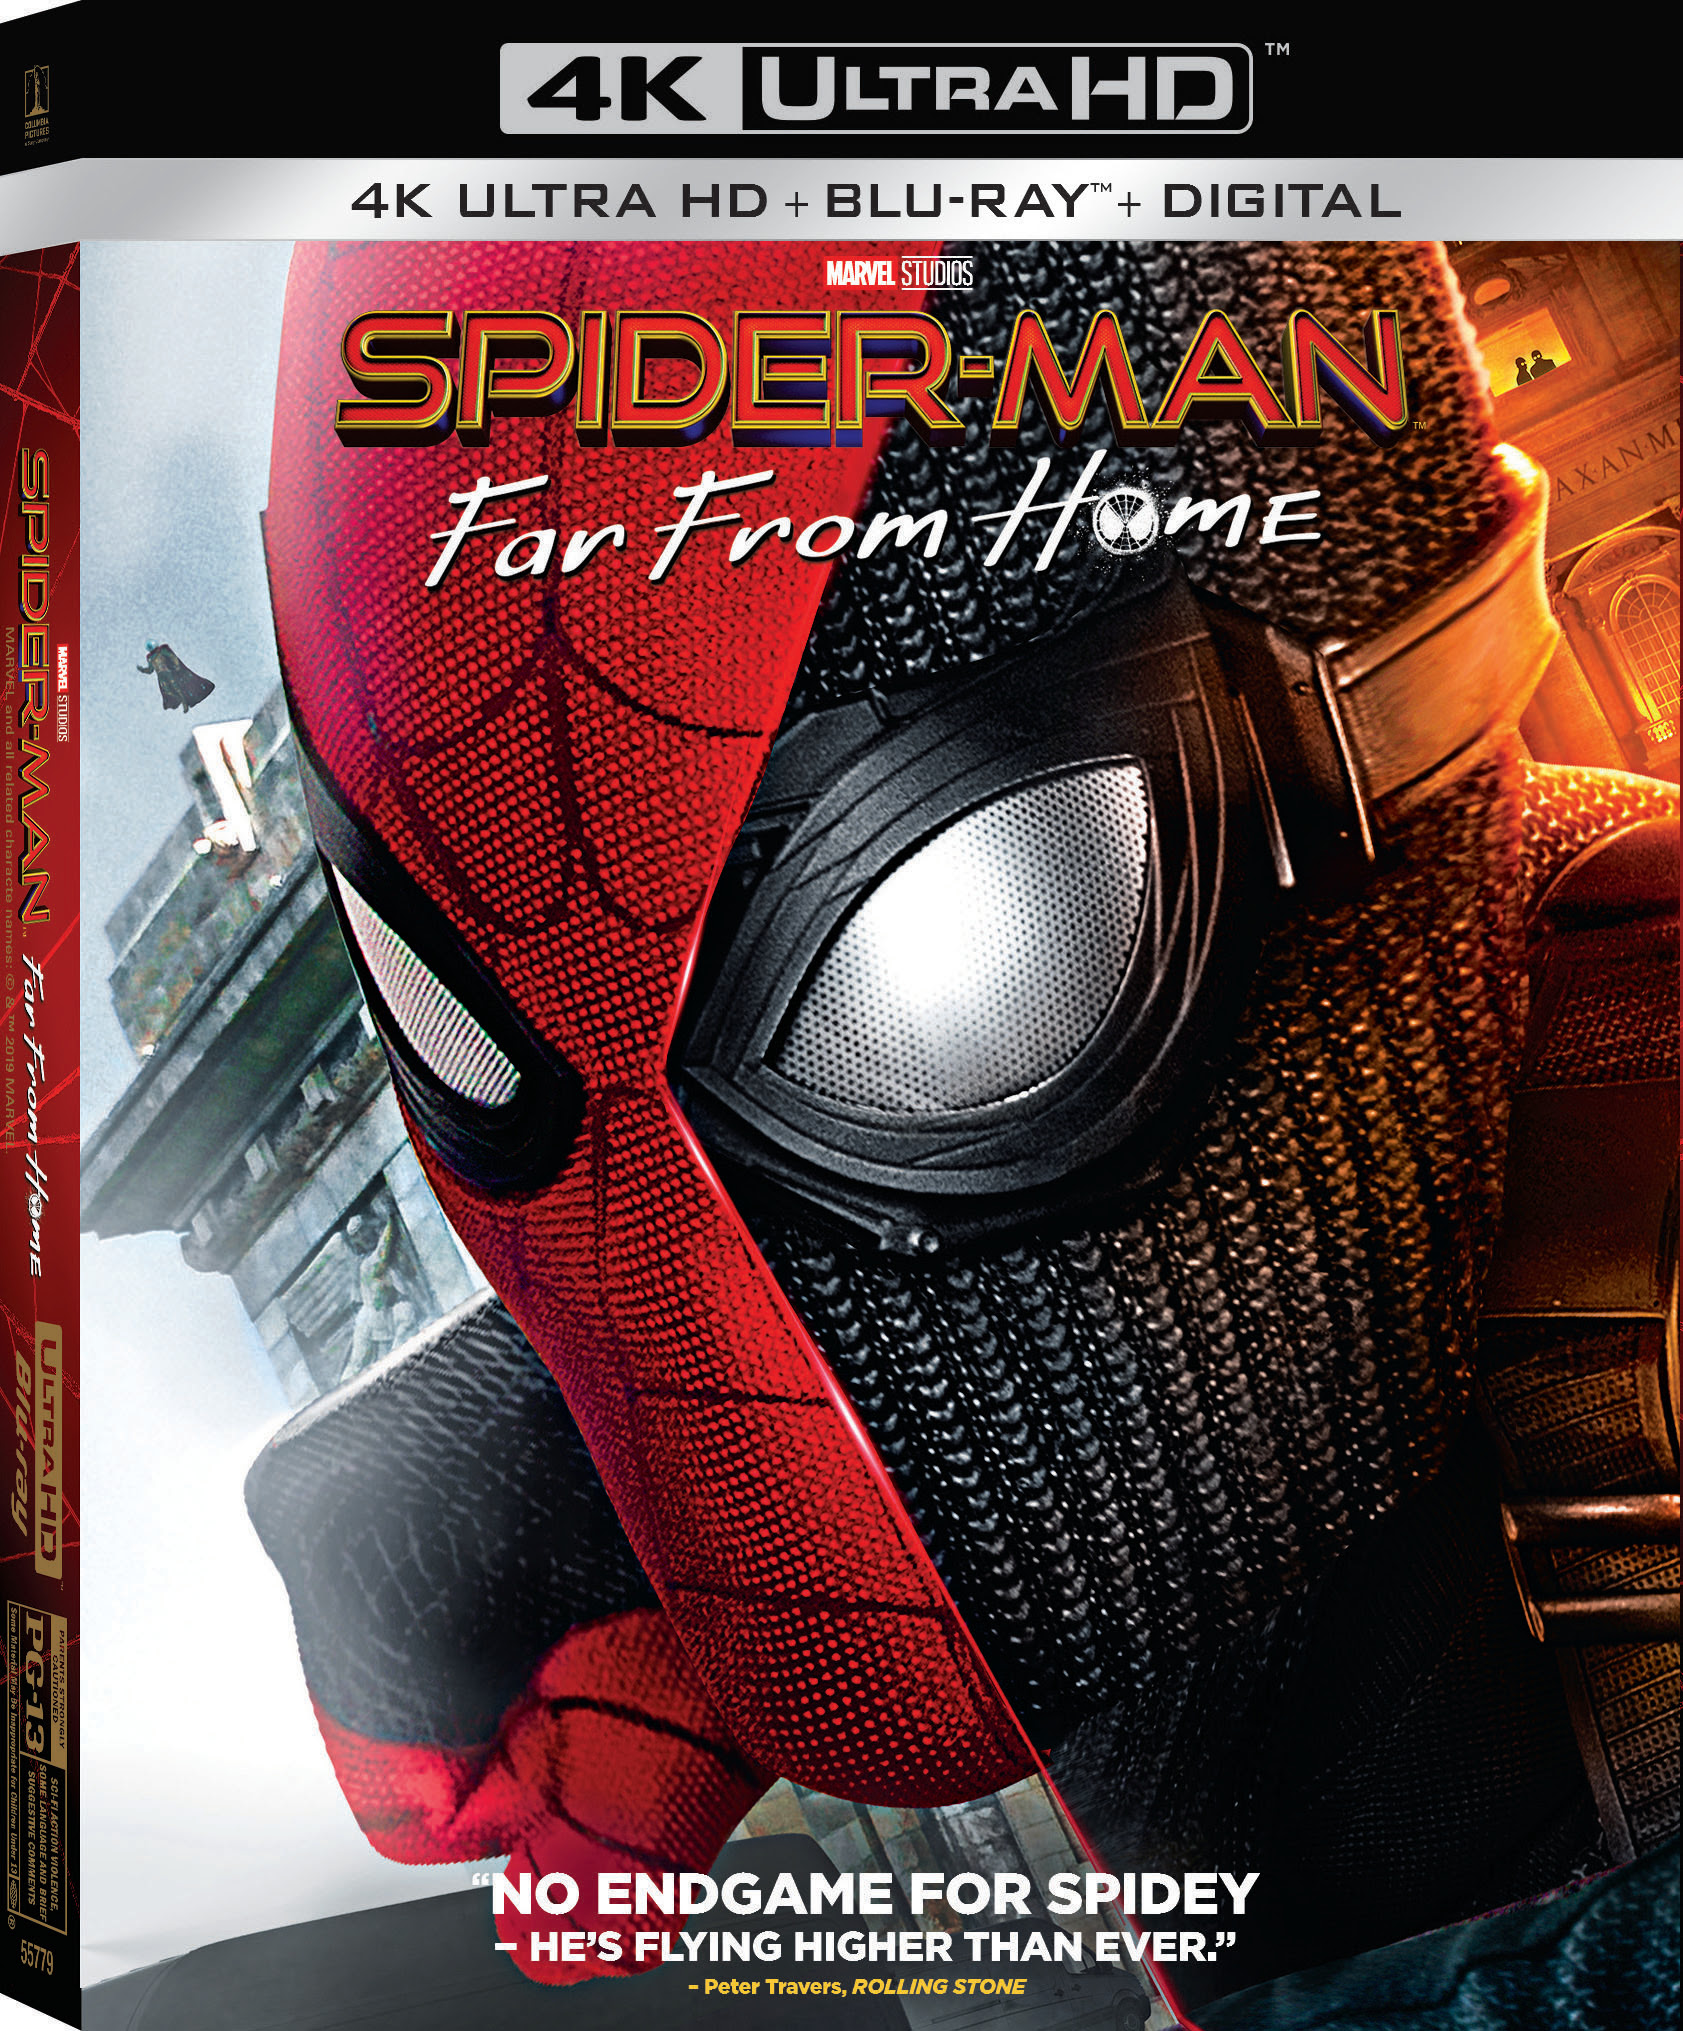 Spider-Man: Far From Home coming to Digital on 9/17 and 4K Ultra HD Blu-ray & DVD 10/1